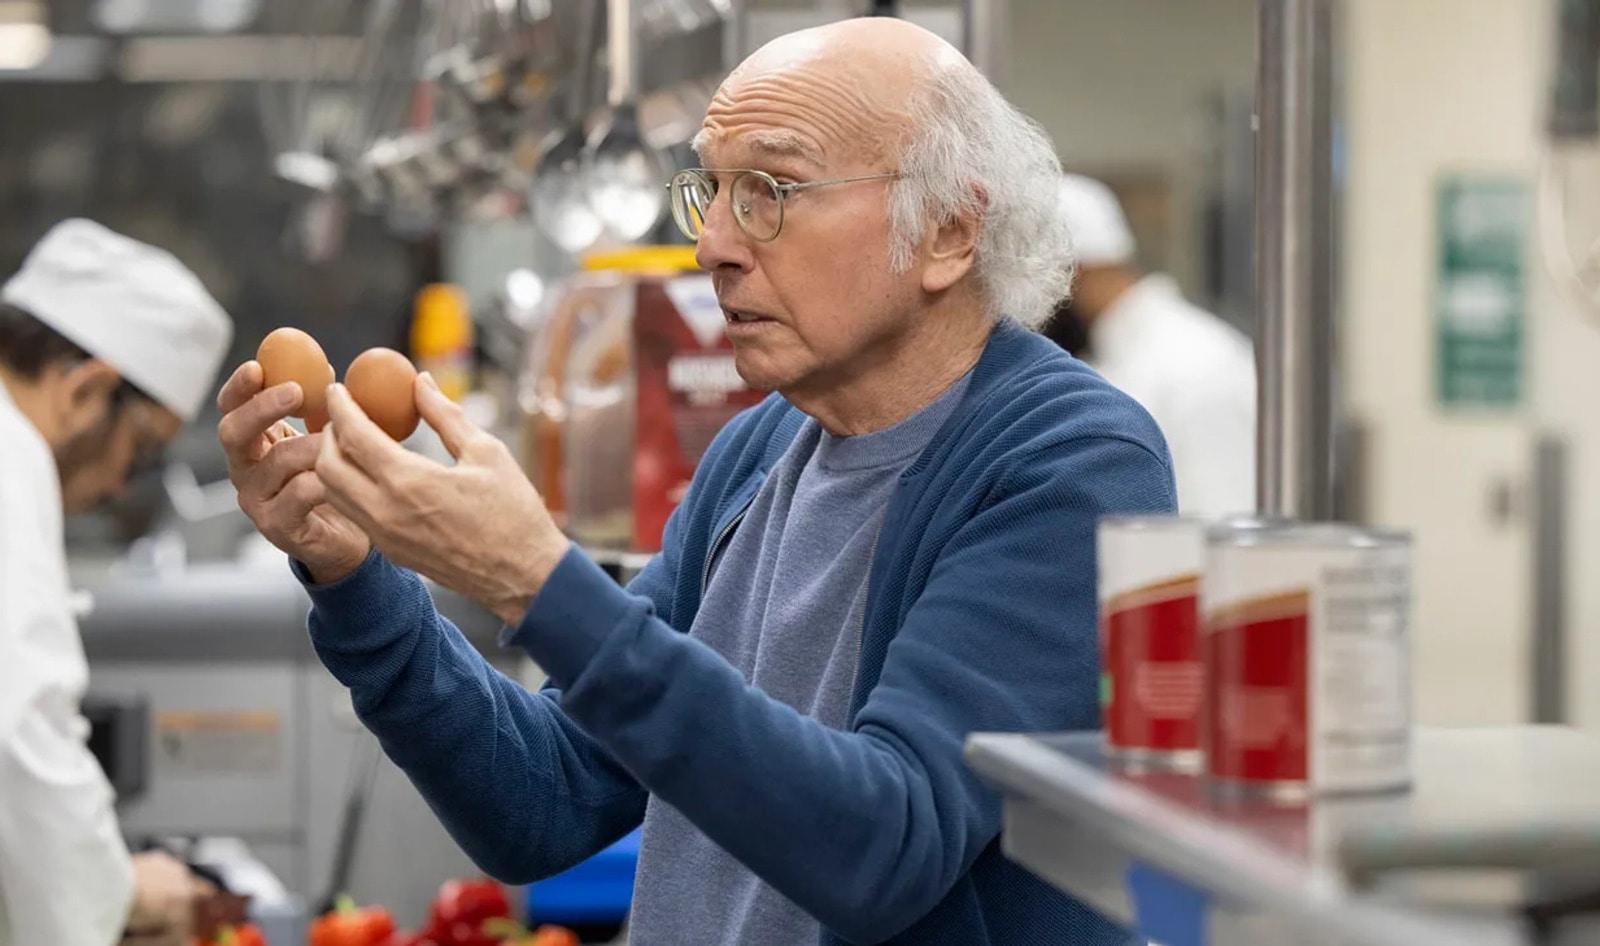 Larry David Should Bring One of These 3 Vegan Eggs to the Club Next Time